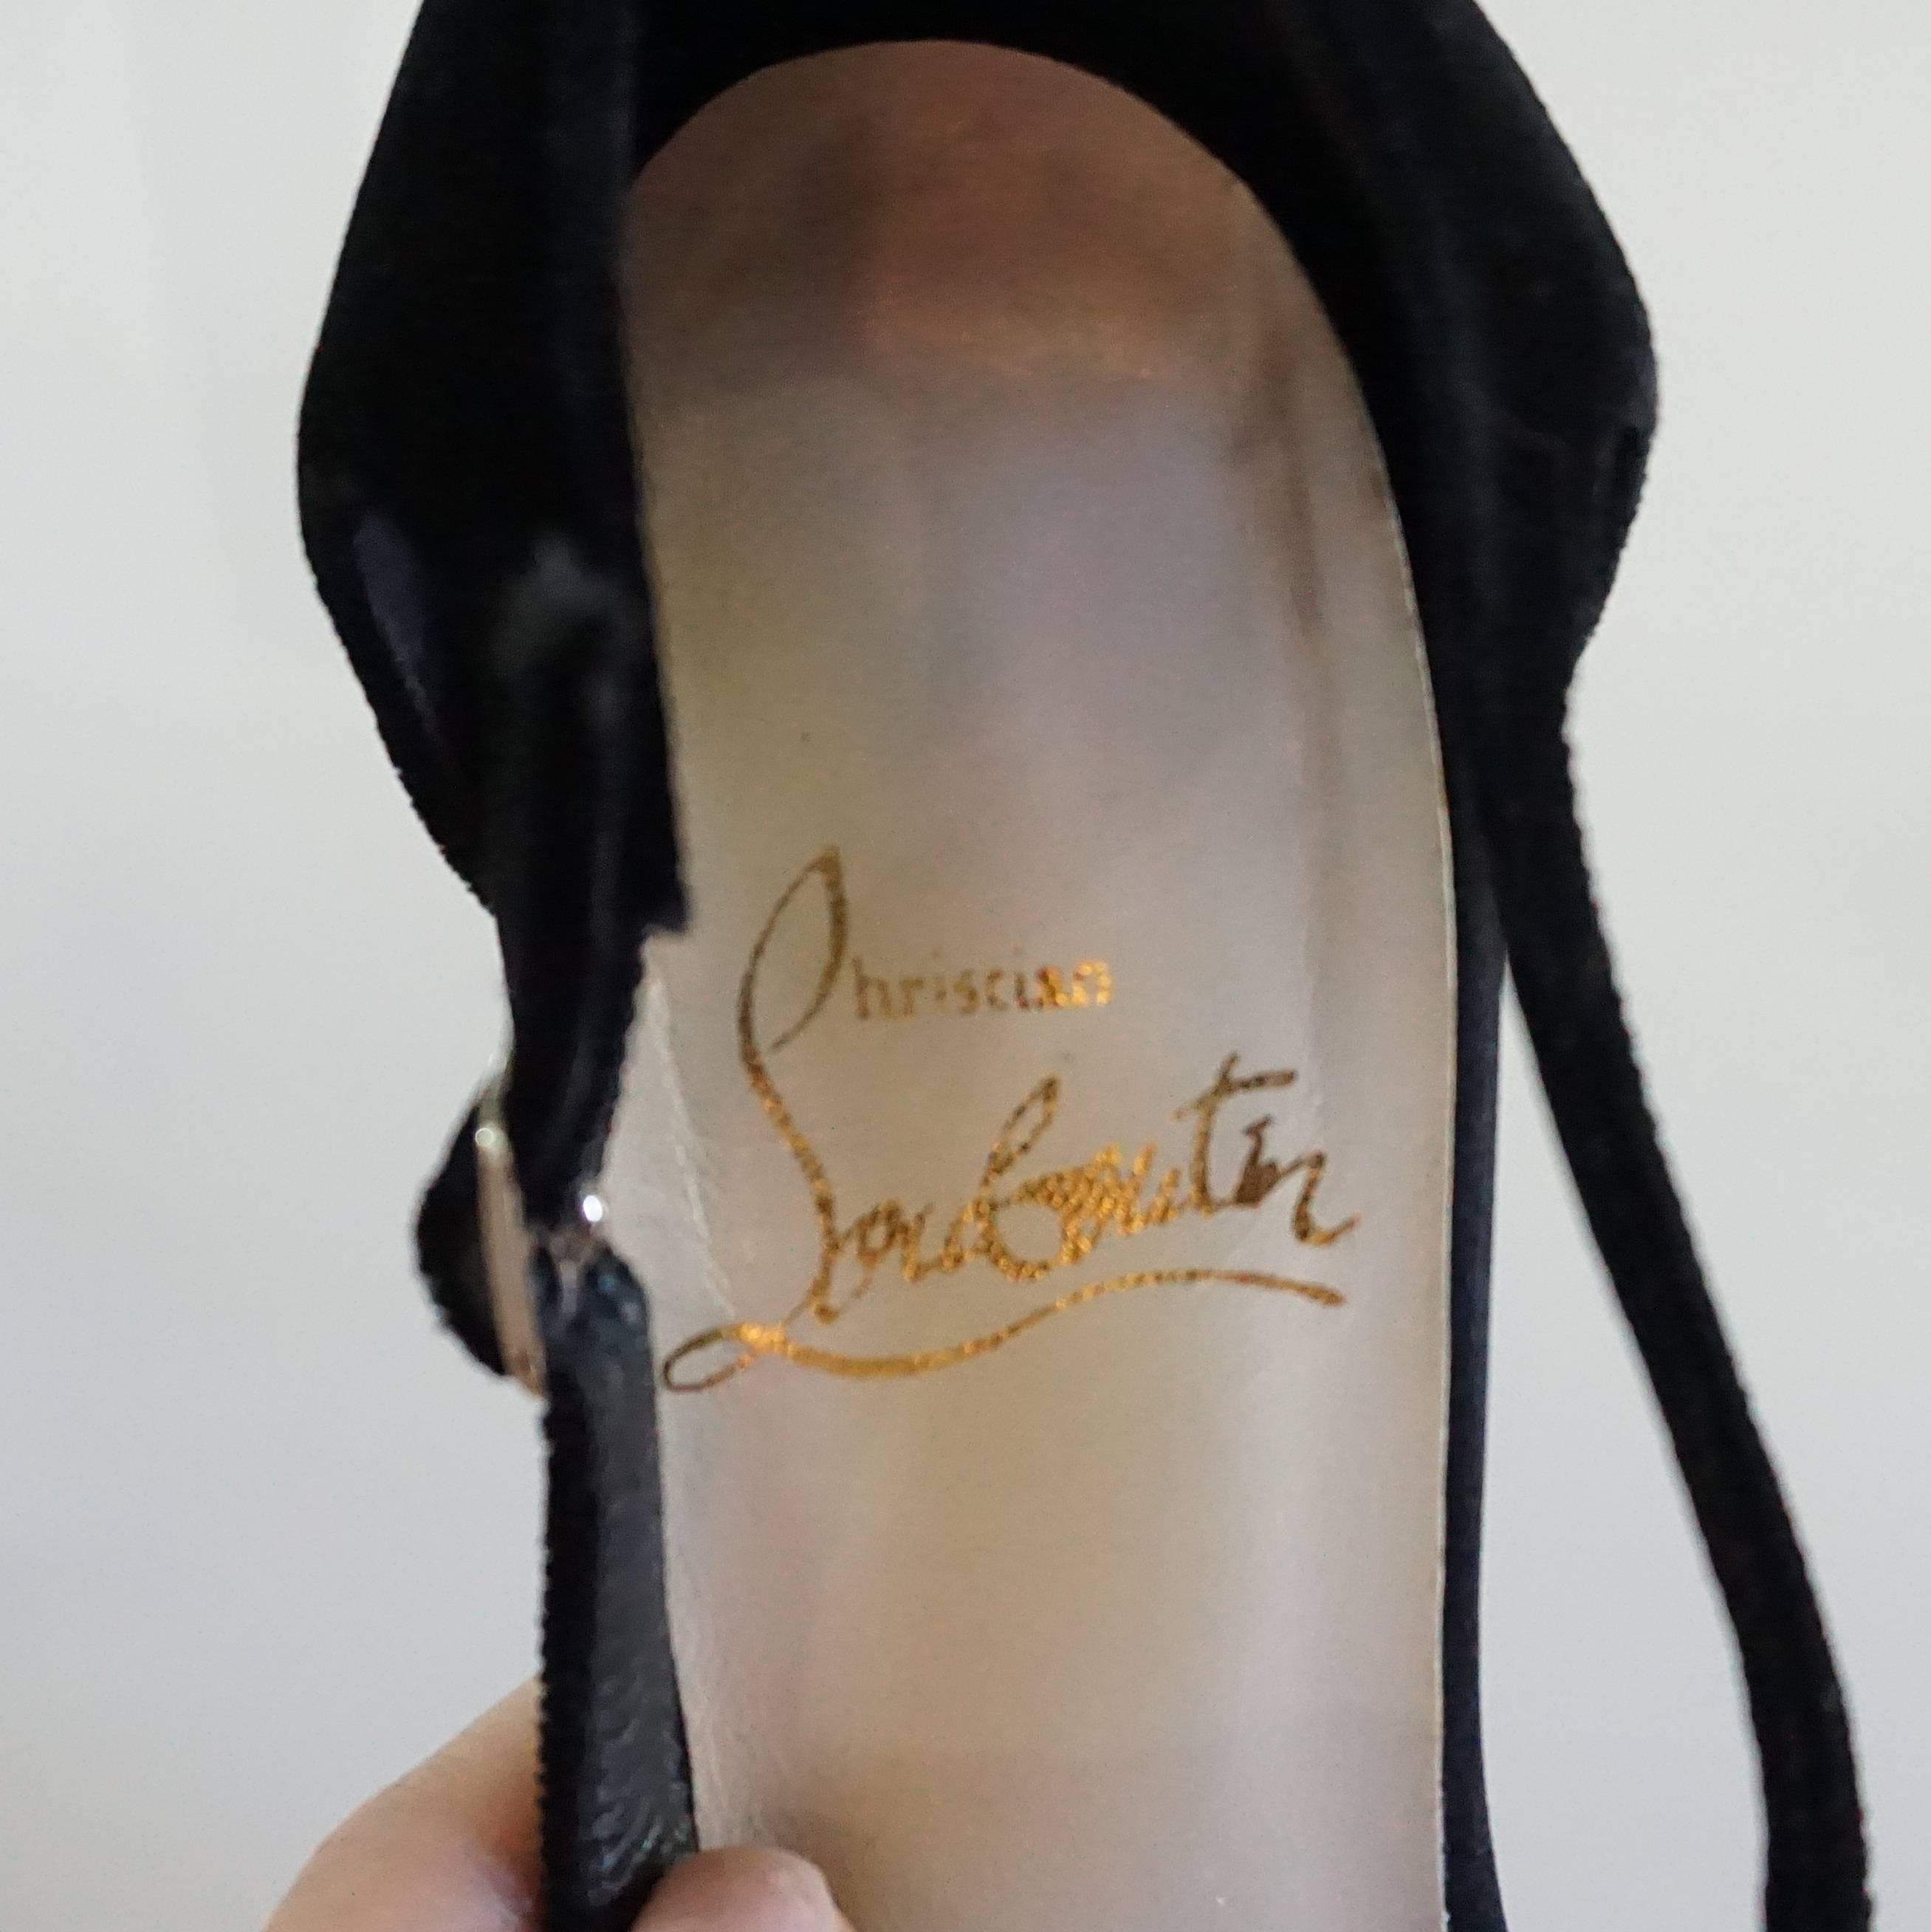 Christian Louboutin Black Velvet Sandals with Rhinestone Cluster - 36.5 In Good Condition For Sale In West Palm Beach, FL